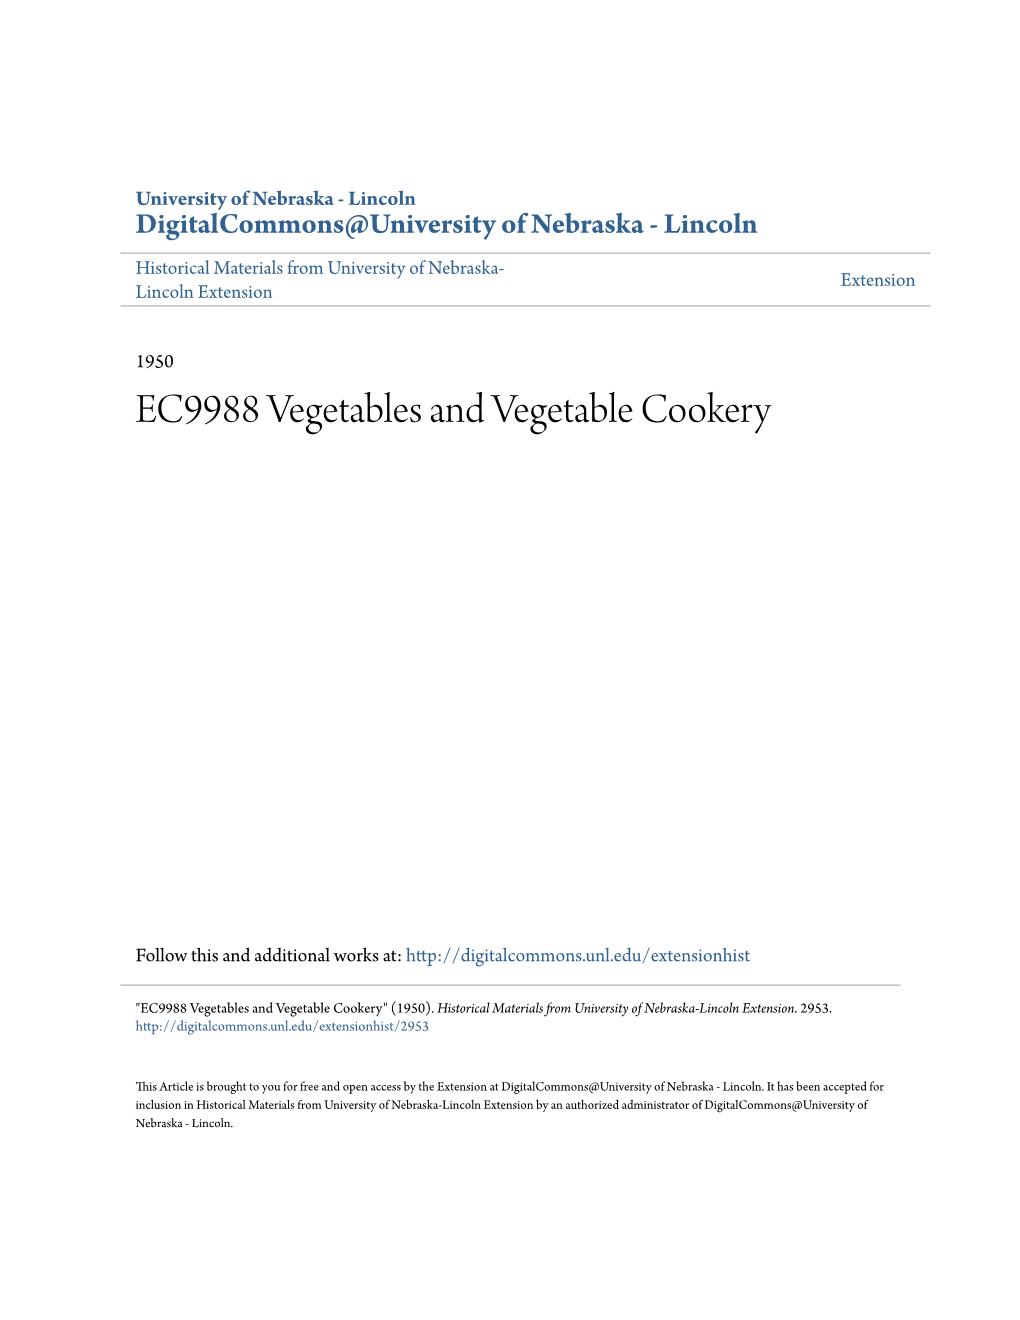 EC9988 Vegetables and Vegetable Cookery